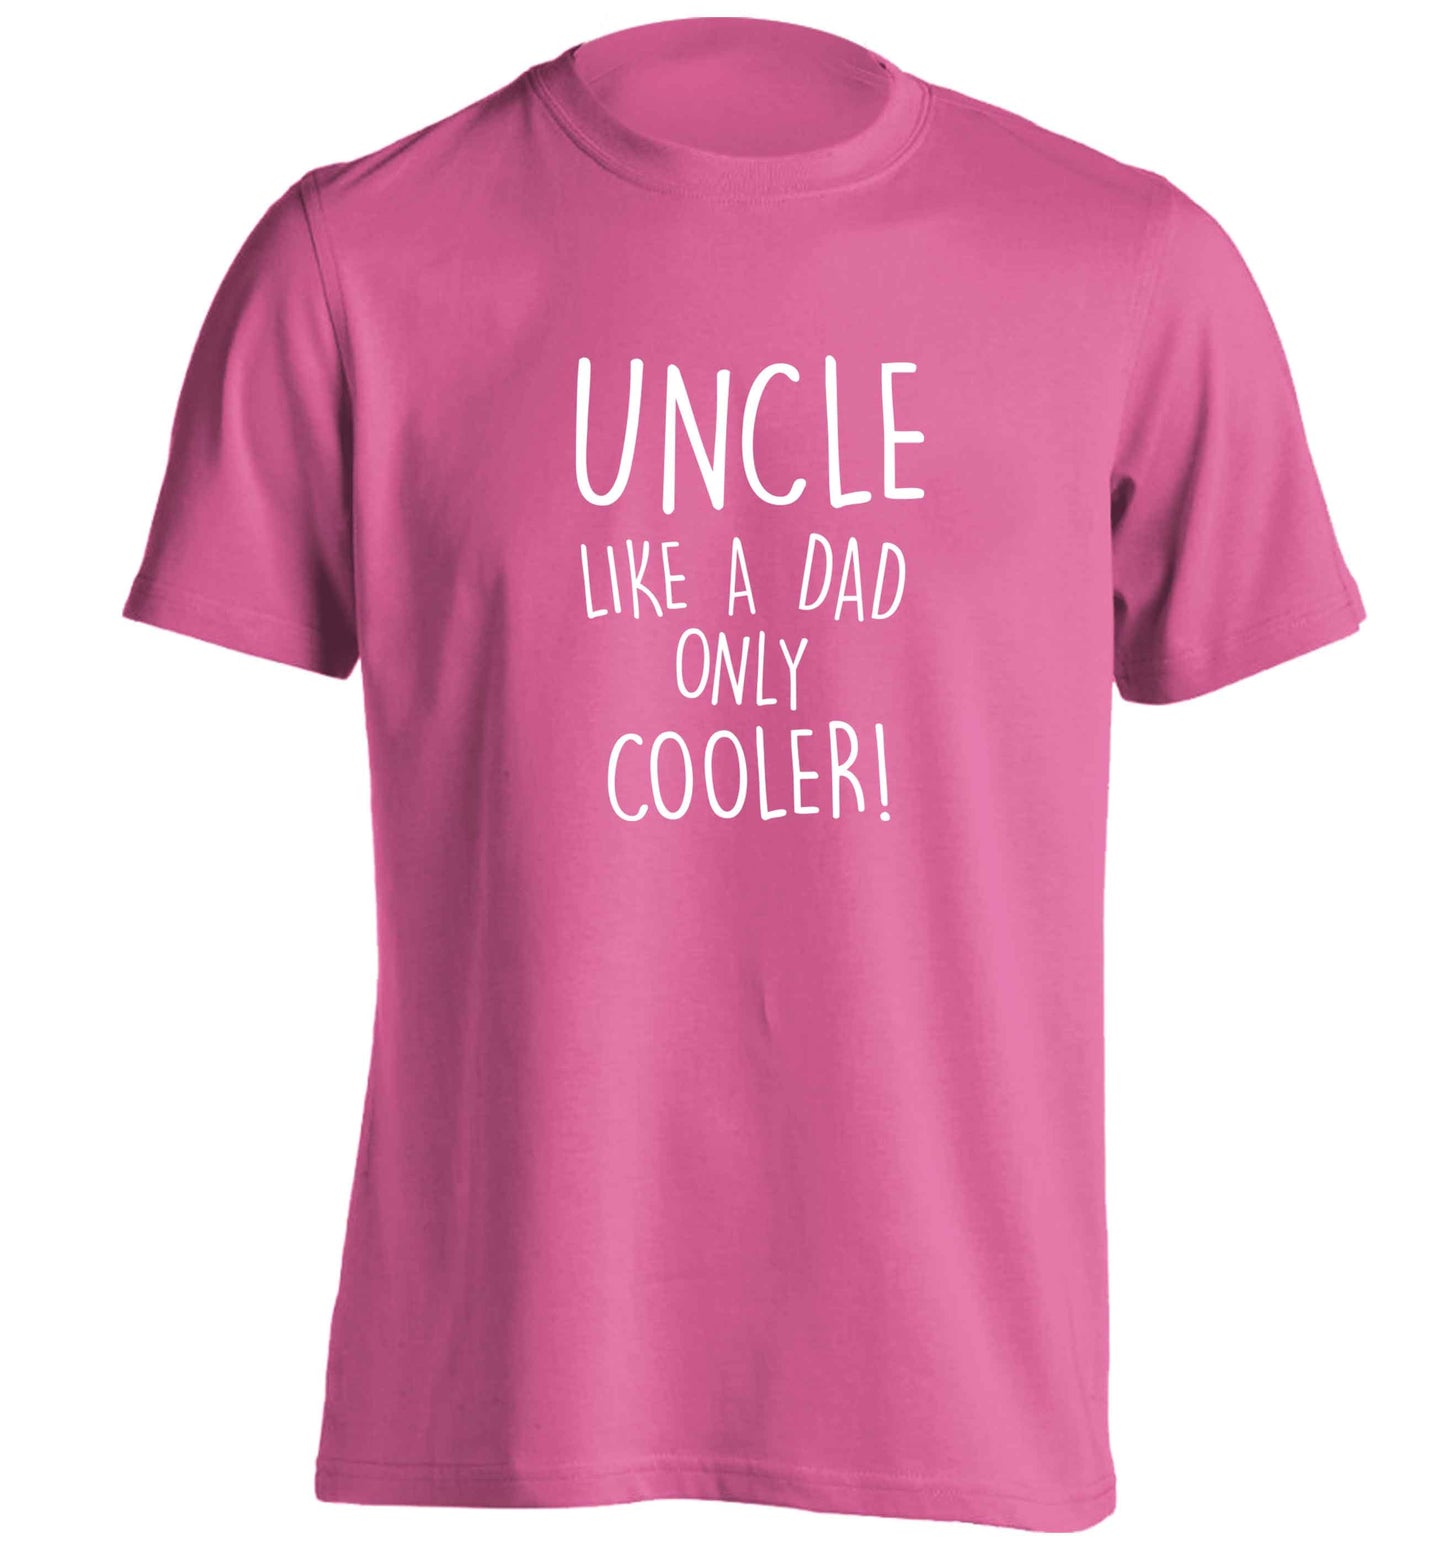 Uncle like a dad only cooler adults unisex pink Tshirt 2XL